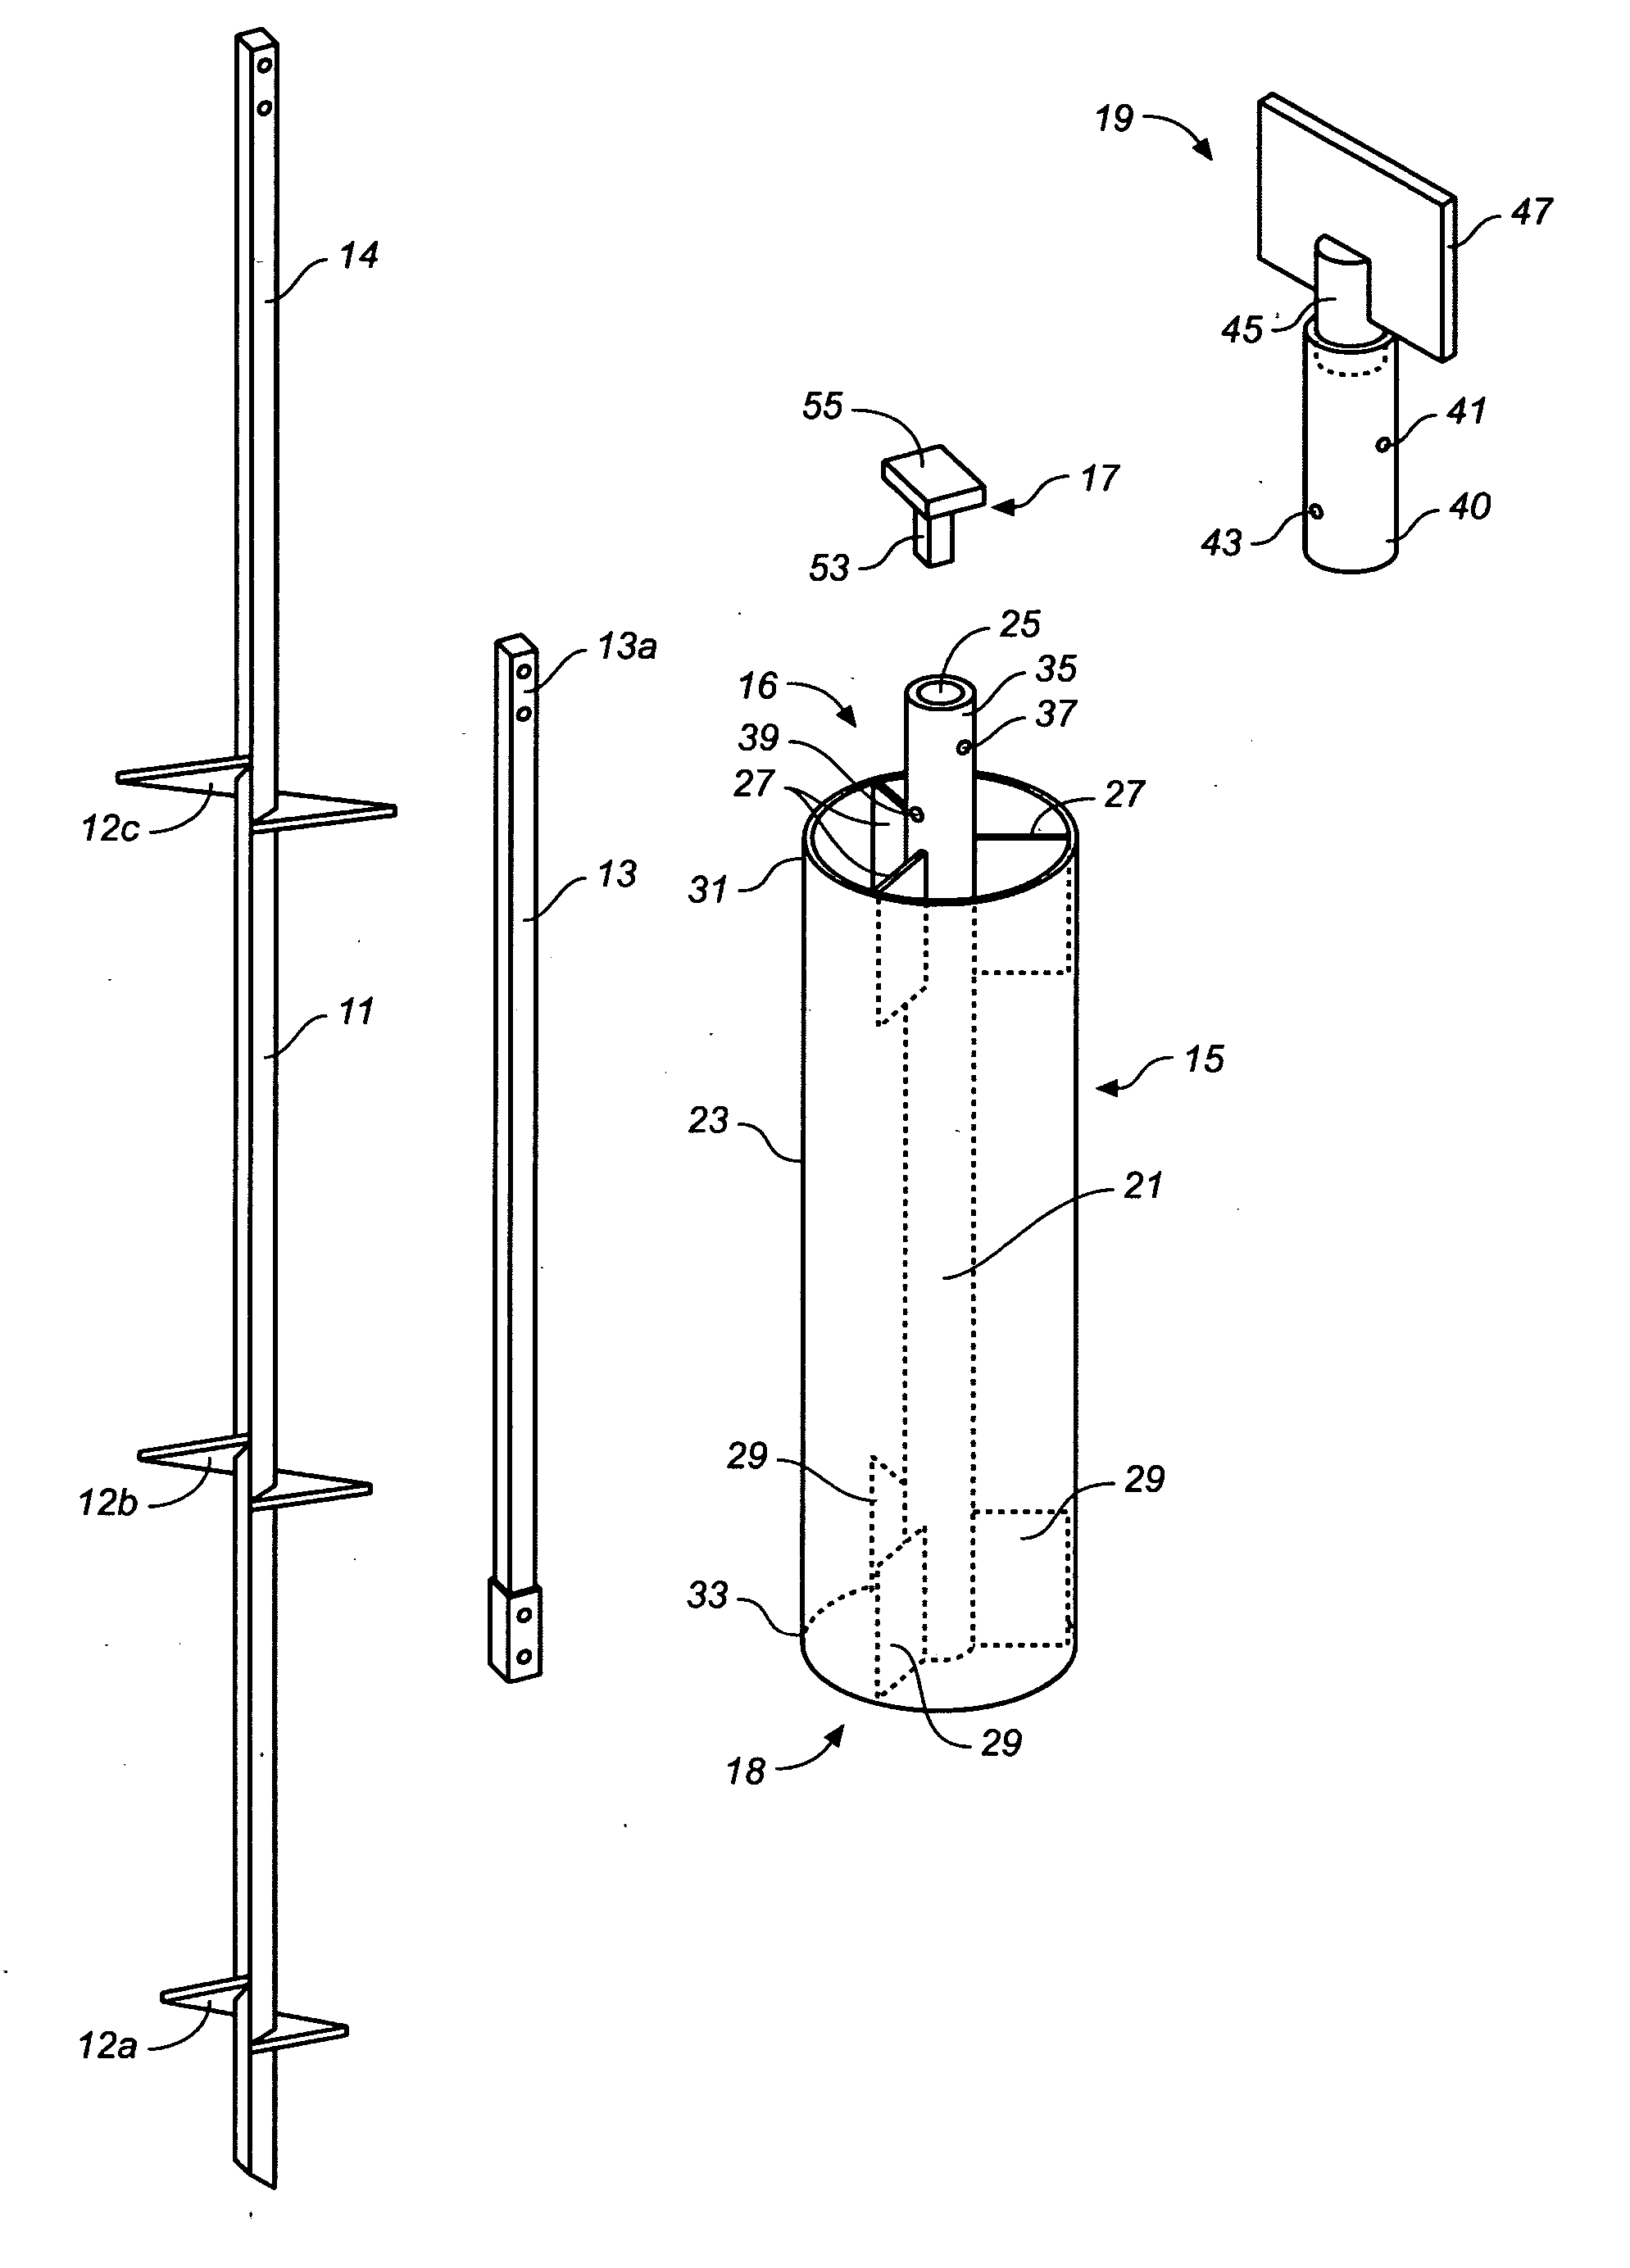 Lateral force resistance device